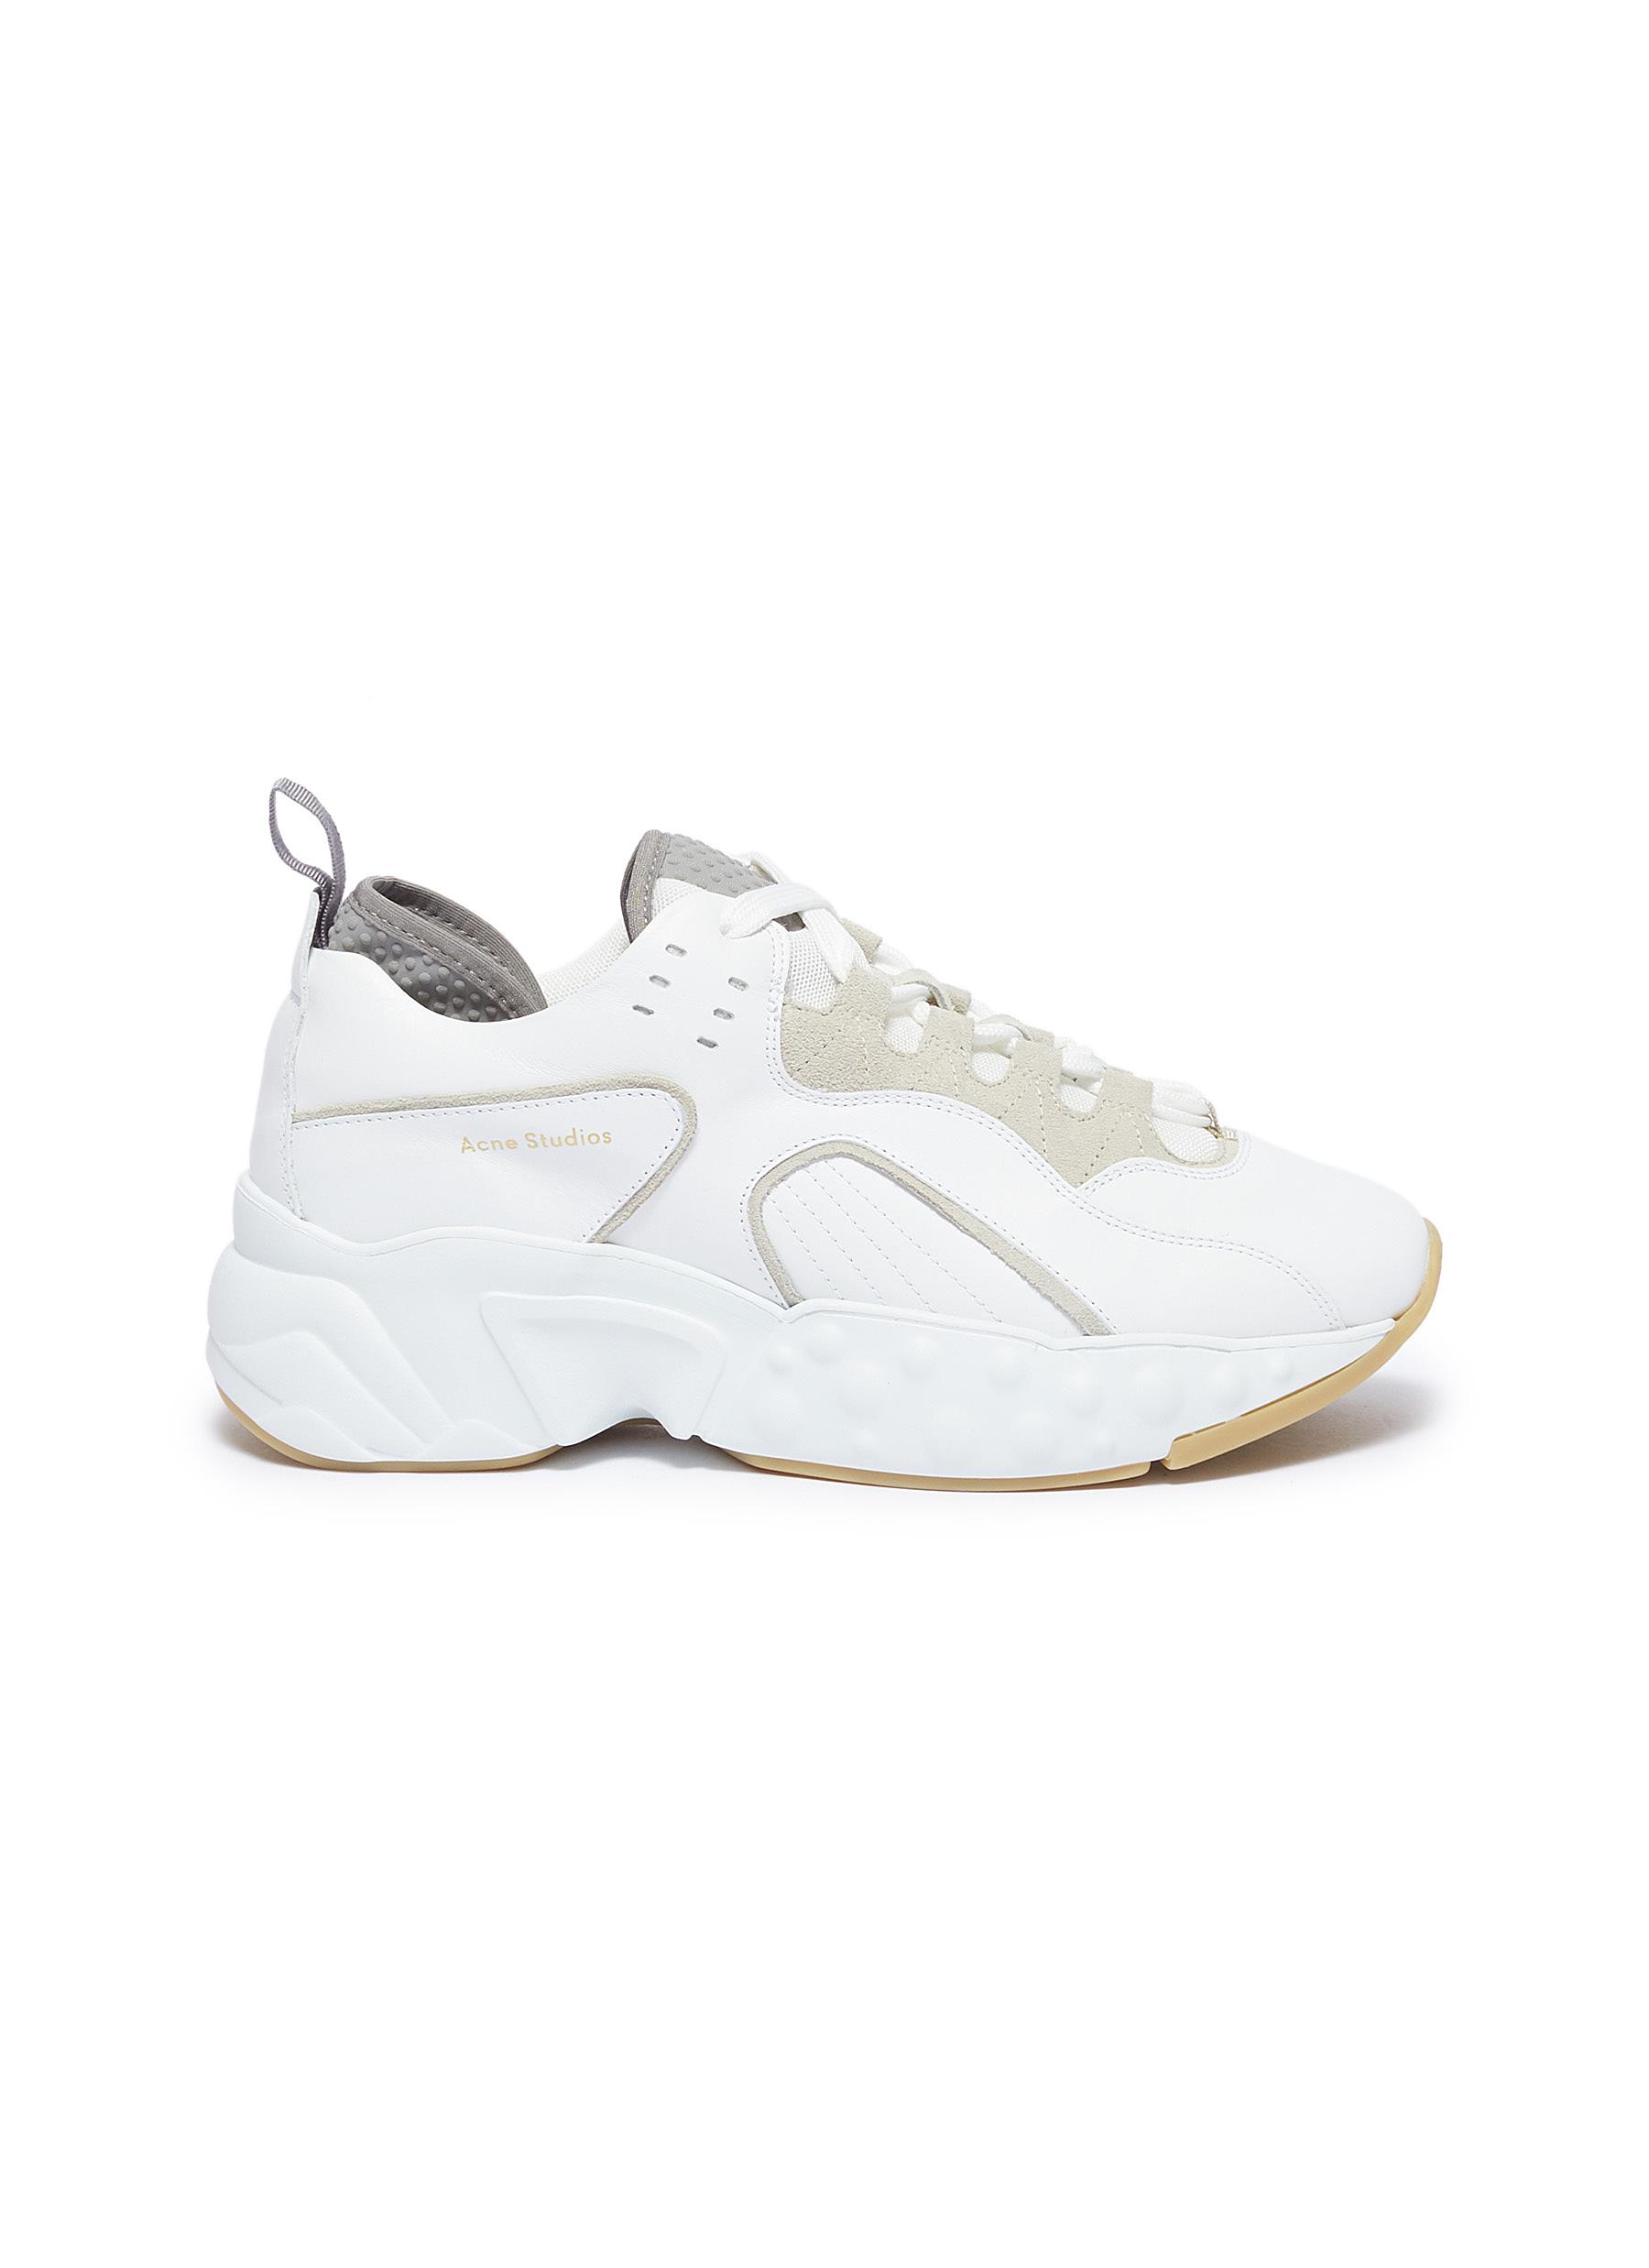 Photo of Acne Studios Shoes Sneakers online sale